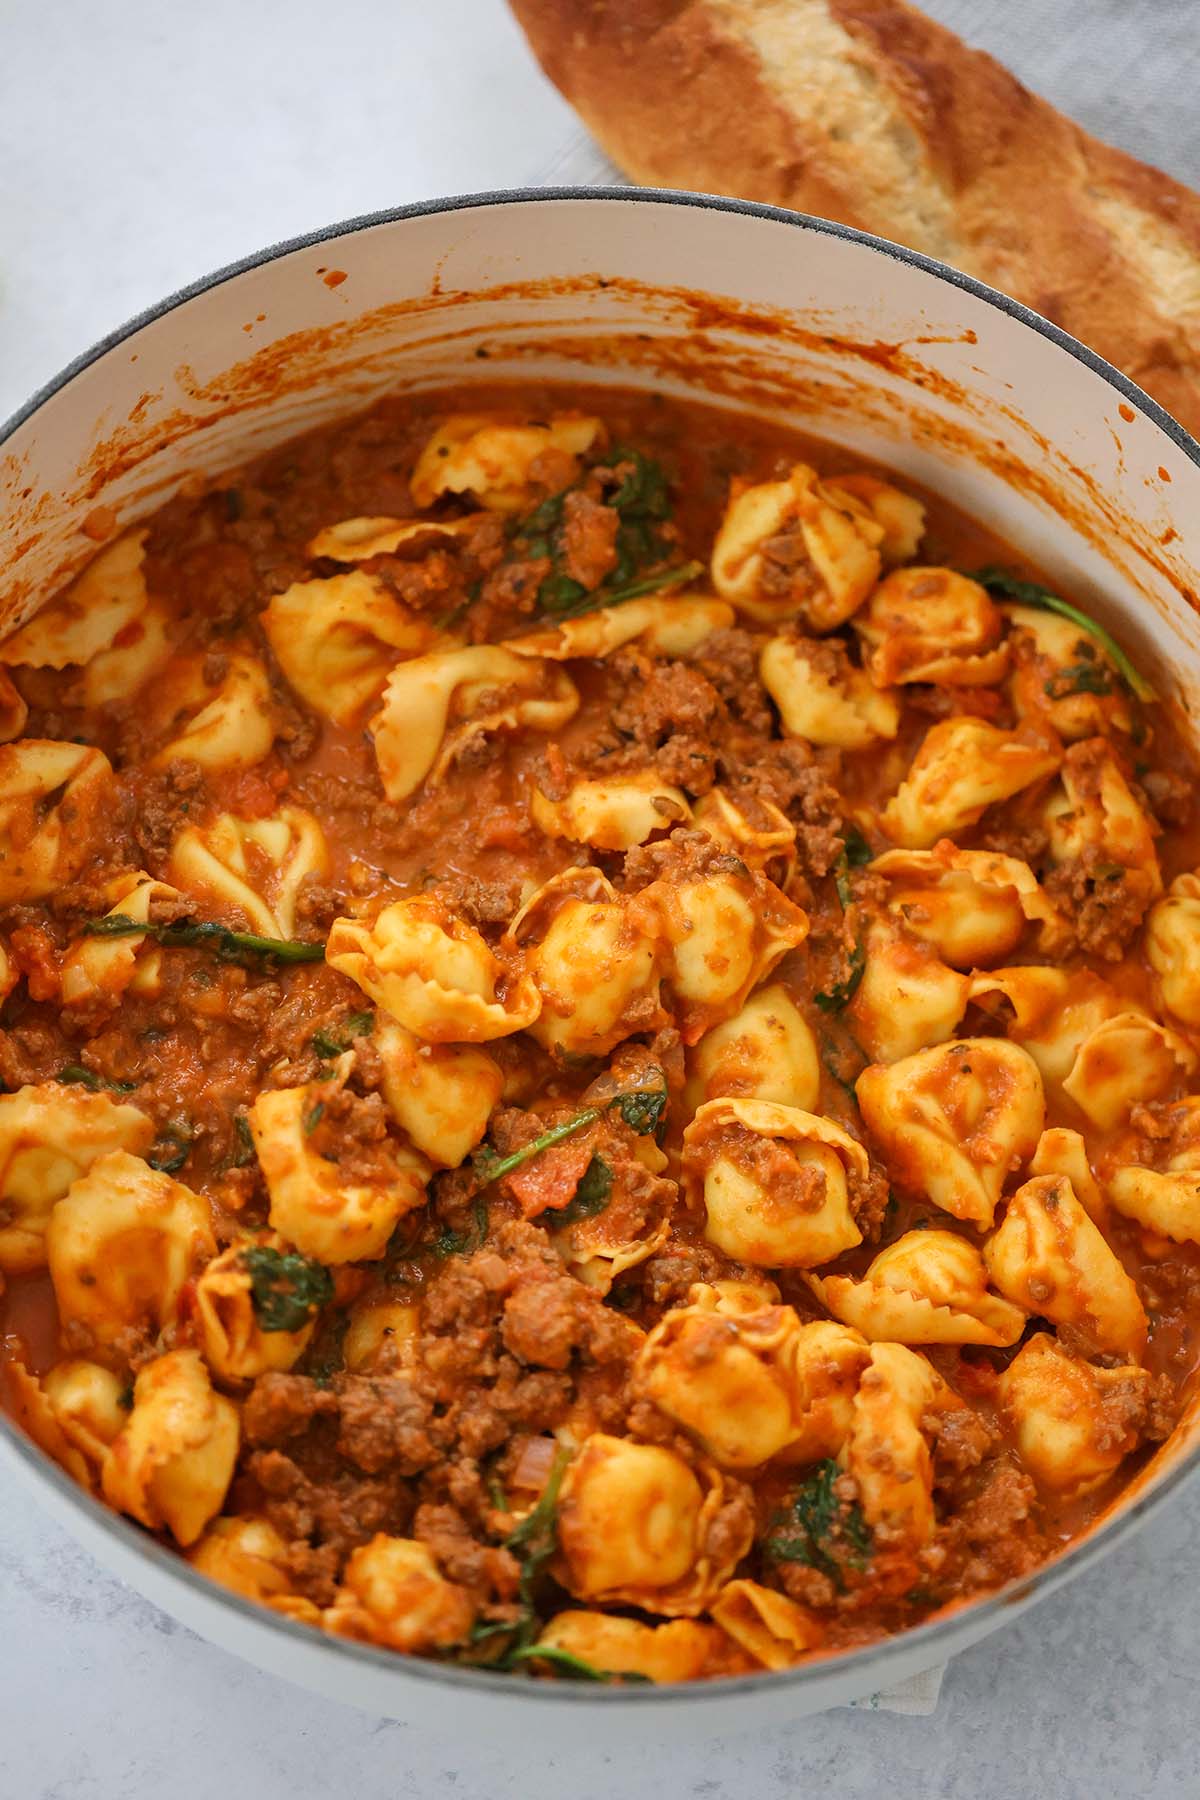 cheese tortellini with spinach and meat sauce in a pot.